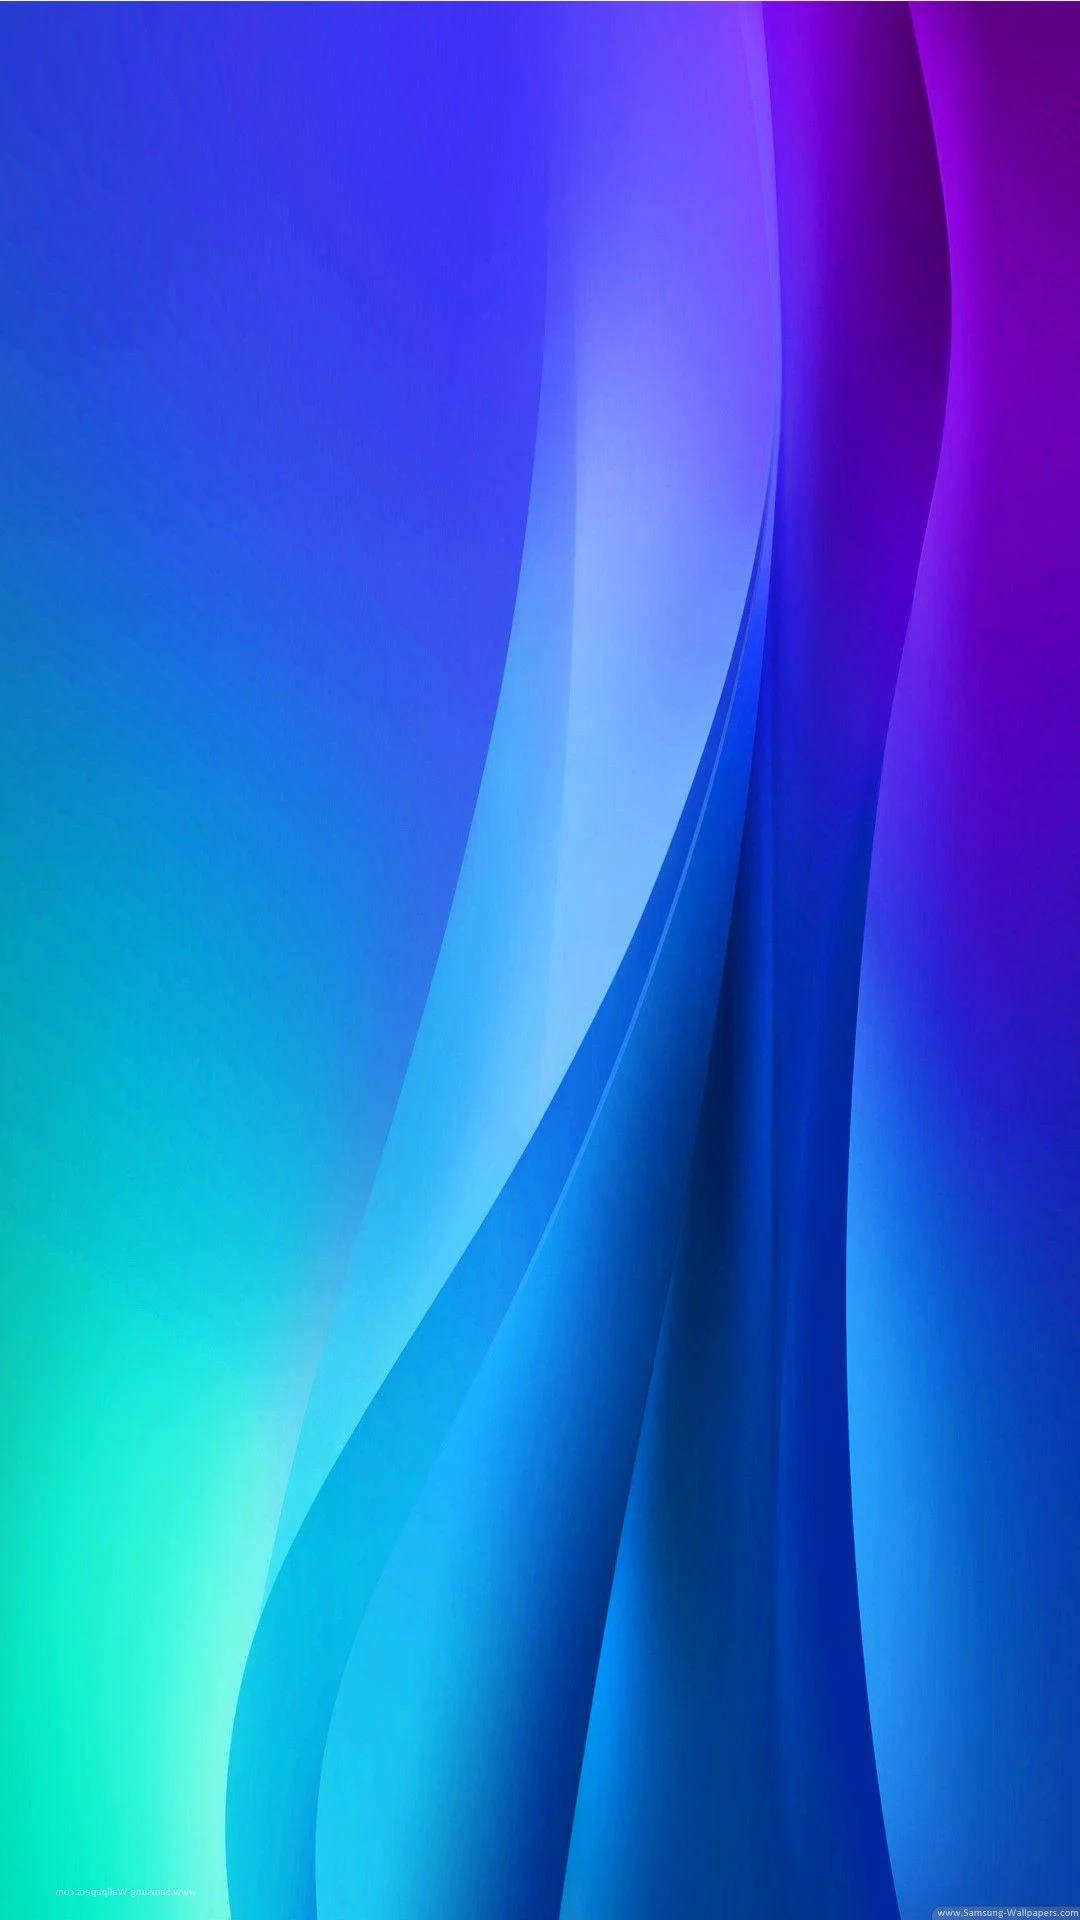 Free Samsung Wallpaper Downloads, [300+] Samsung Wallpapers for FREE |  